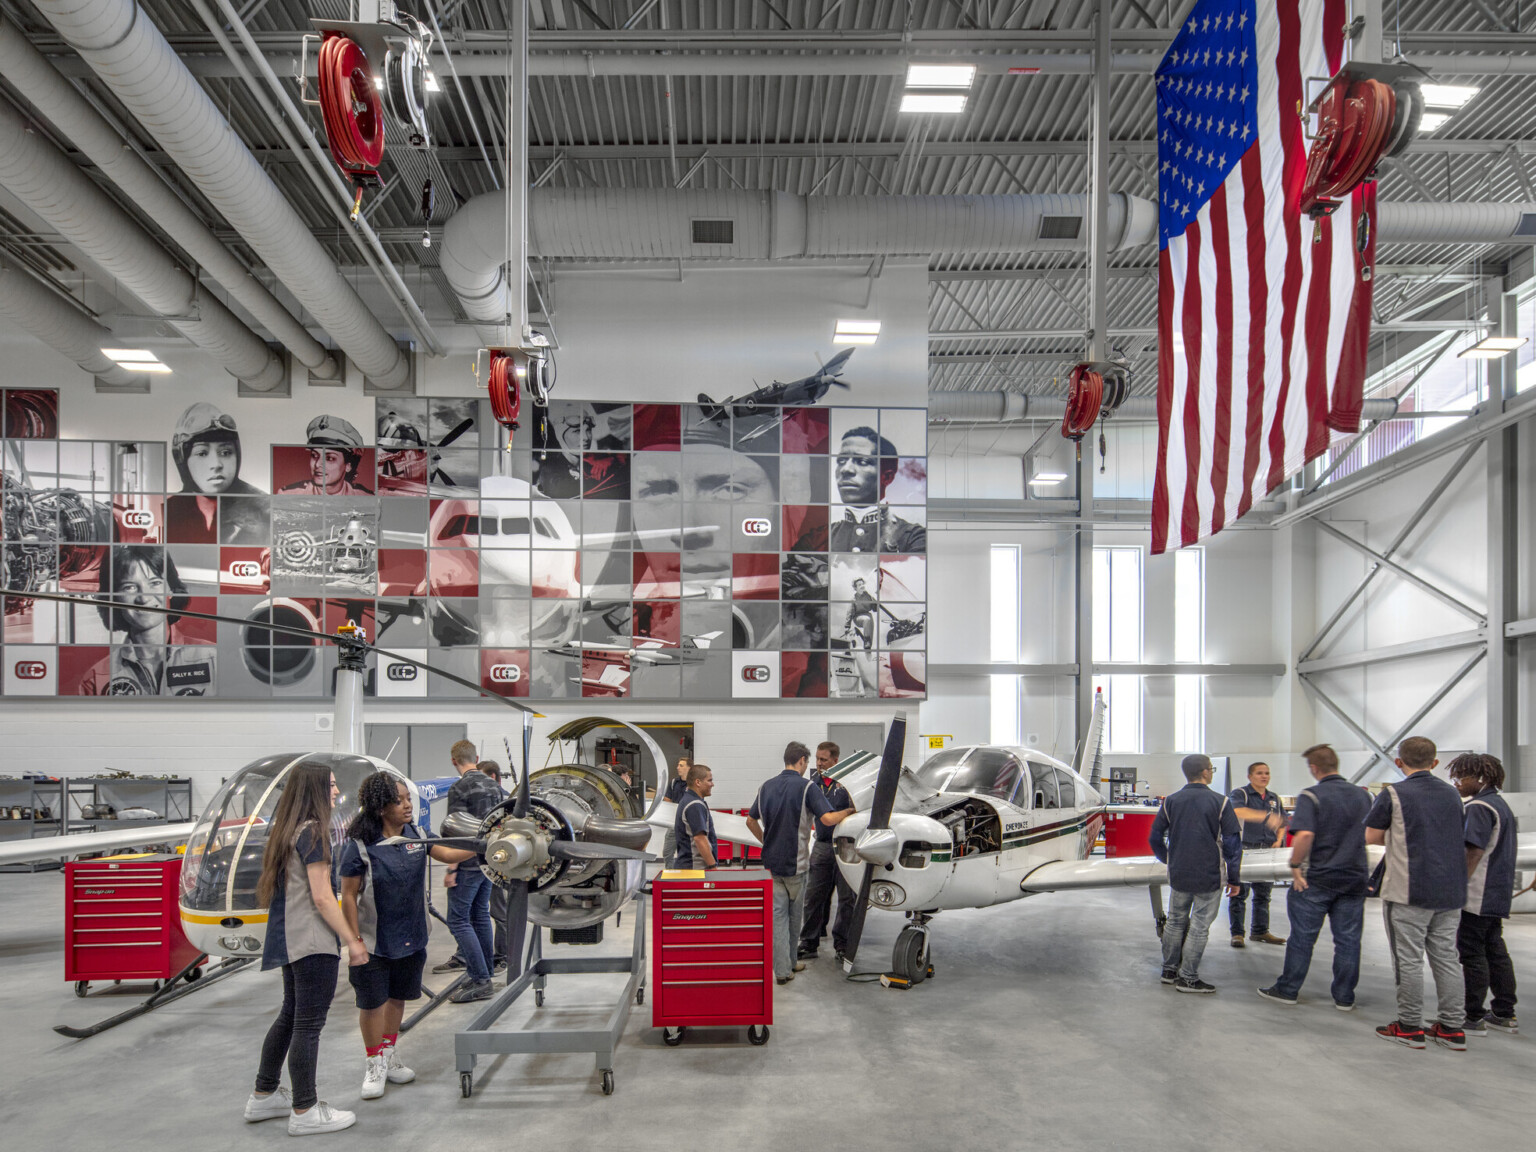 Aviation lab with helicopter, small plane, and displayed engine, mural at back with planes and pilots, american flag, right